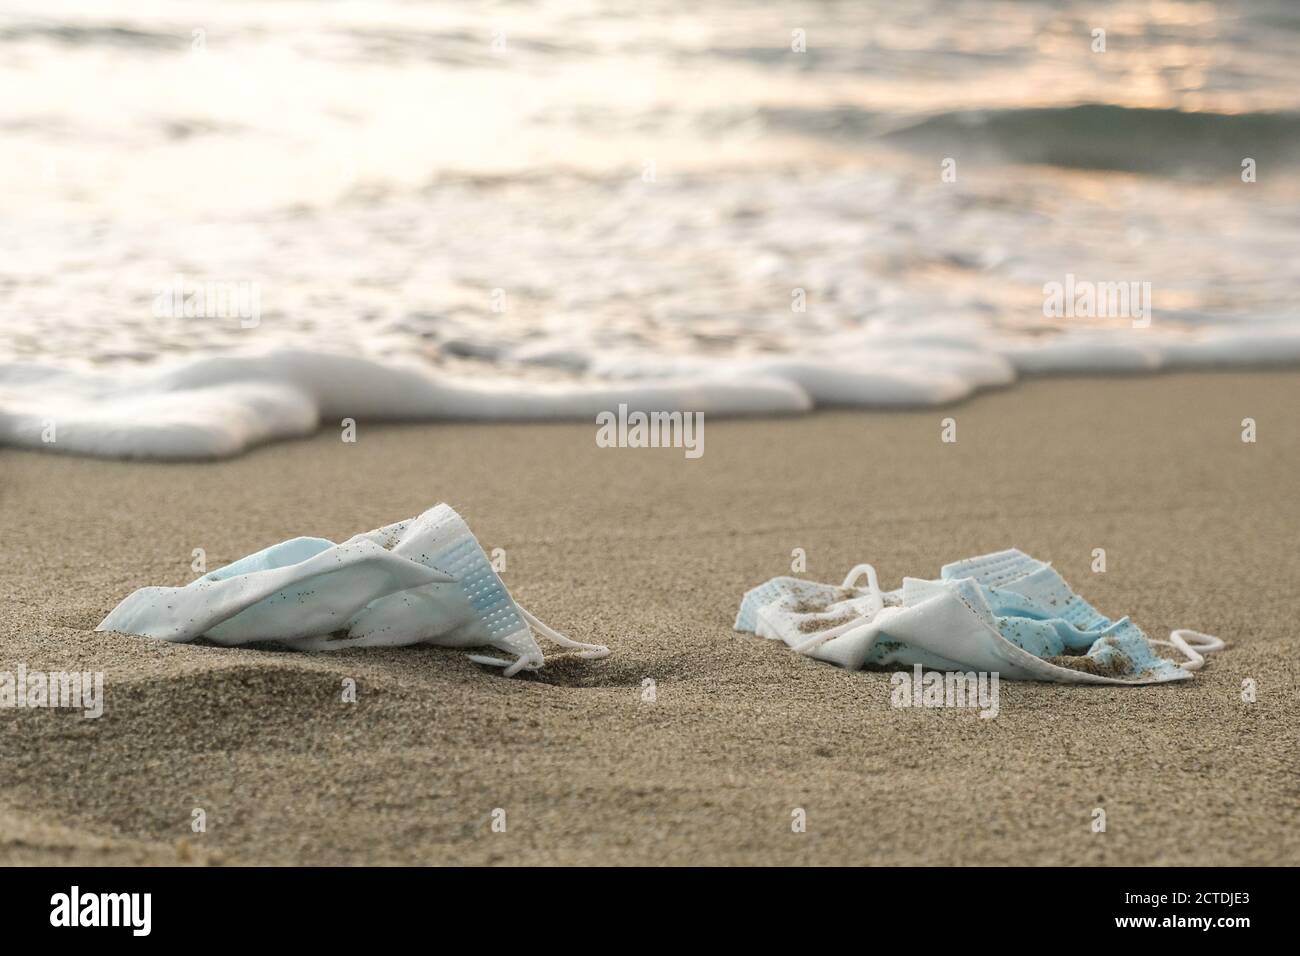 Medical face masks discarded on sea shore,covid19 pandemic disease pollution Stock Photo